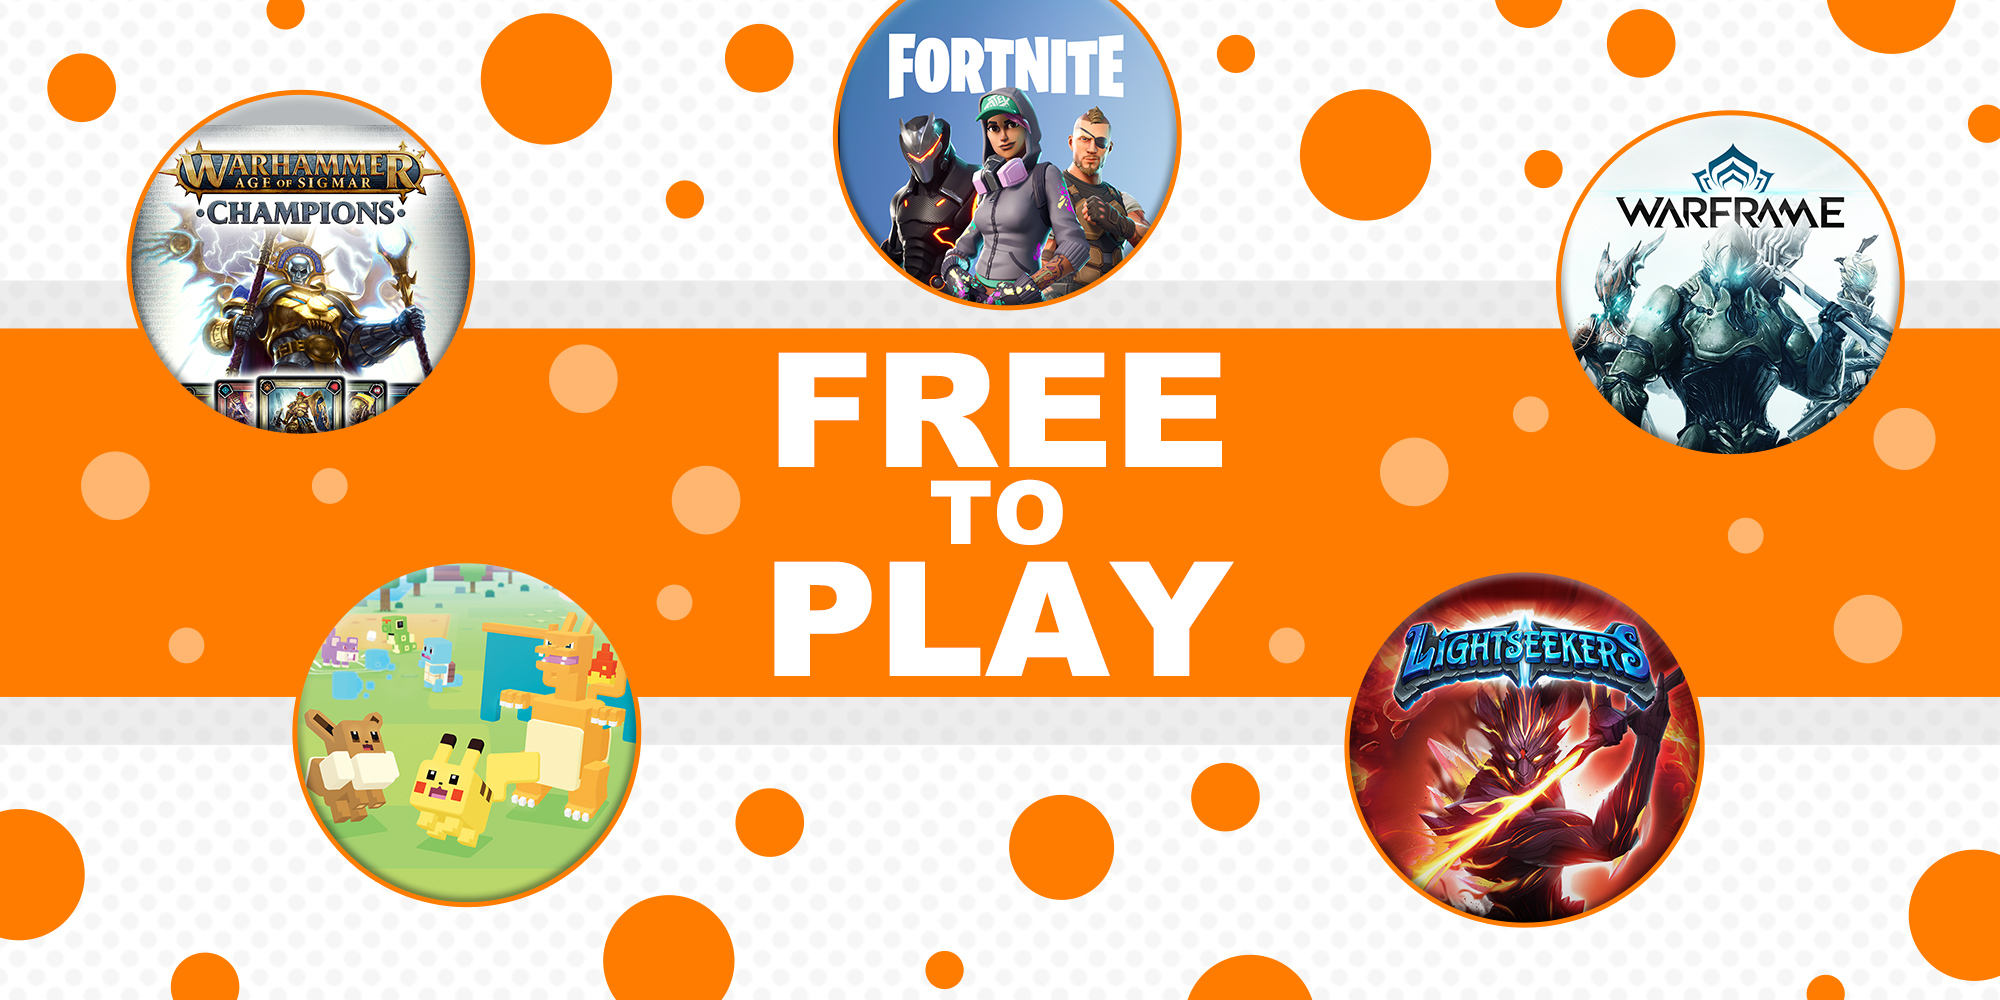 Play for free with this selection of free-to-play games!